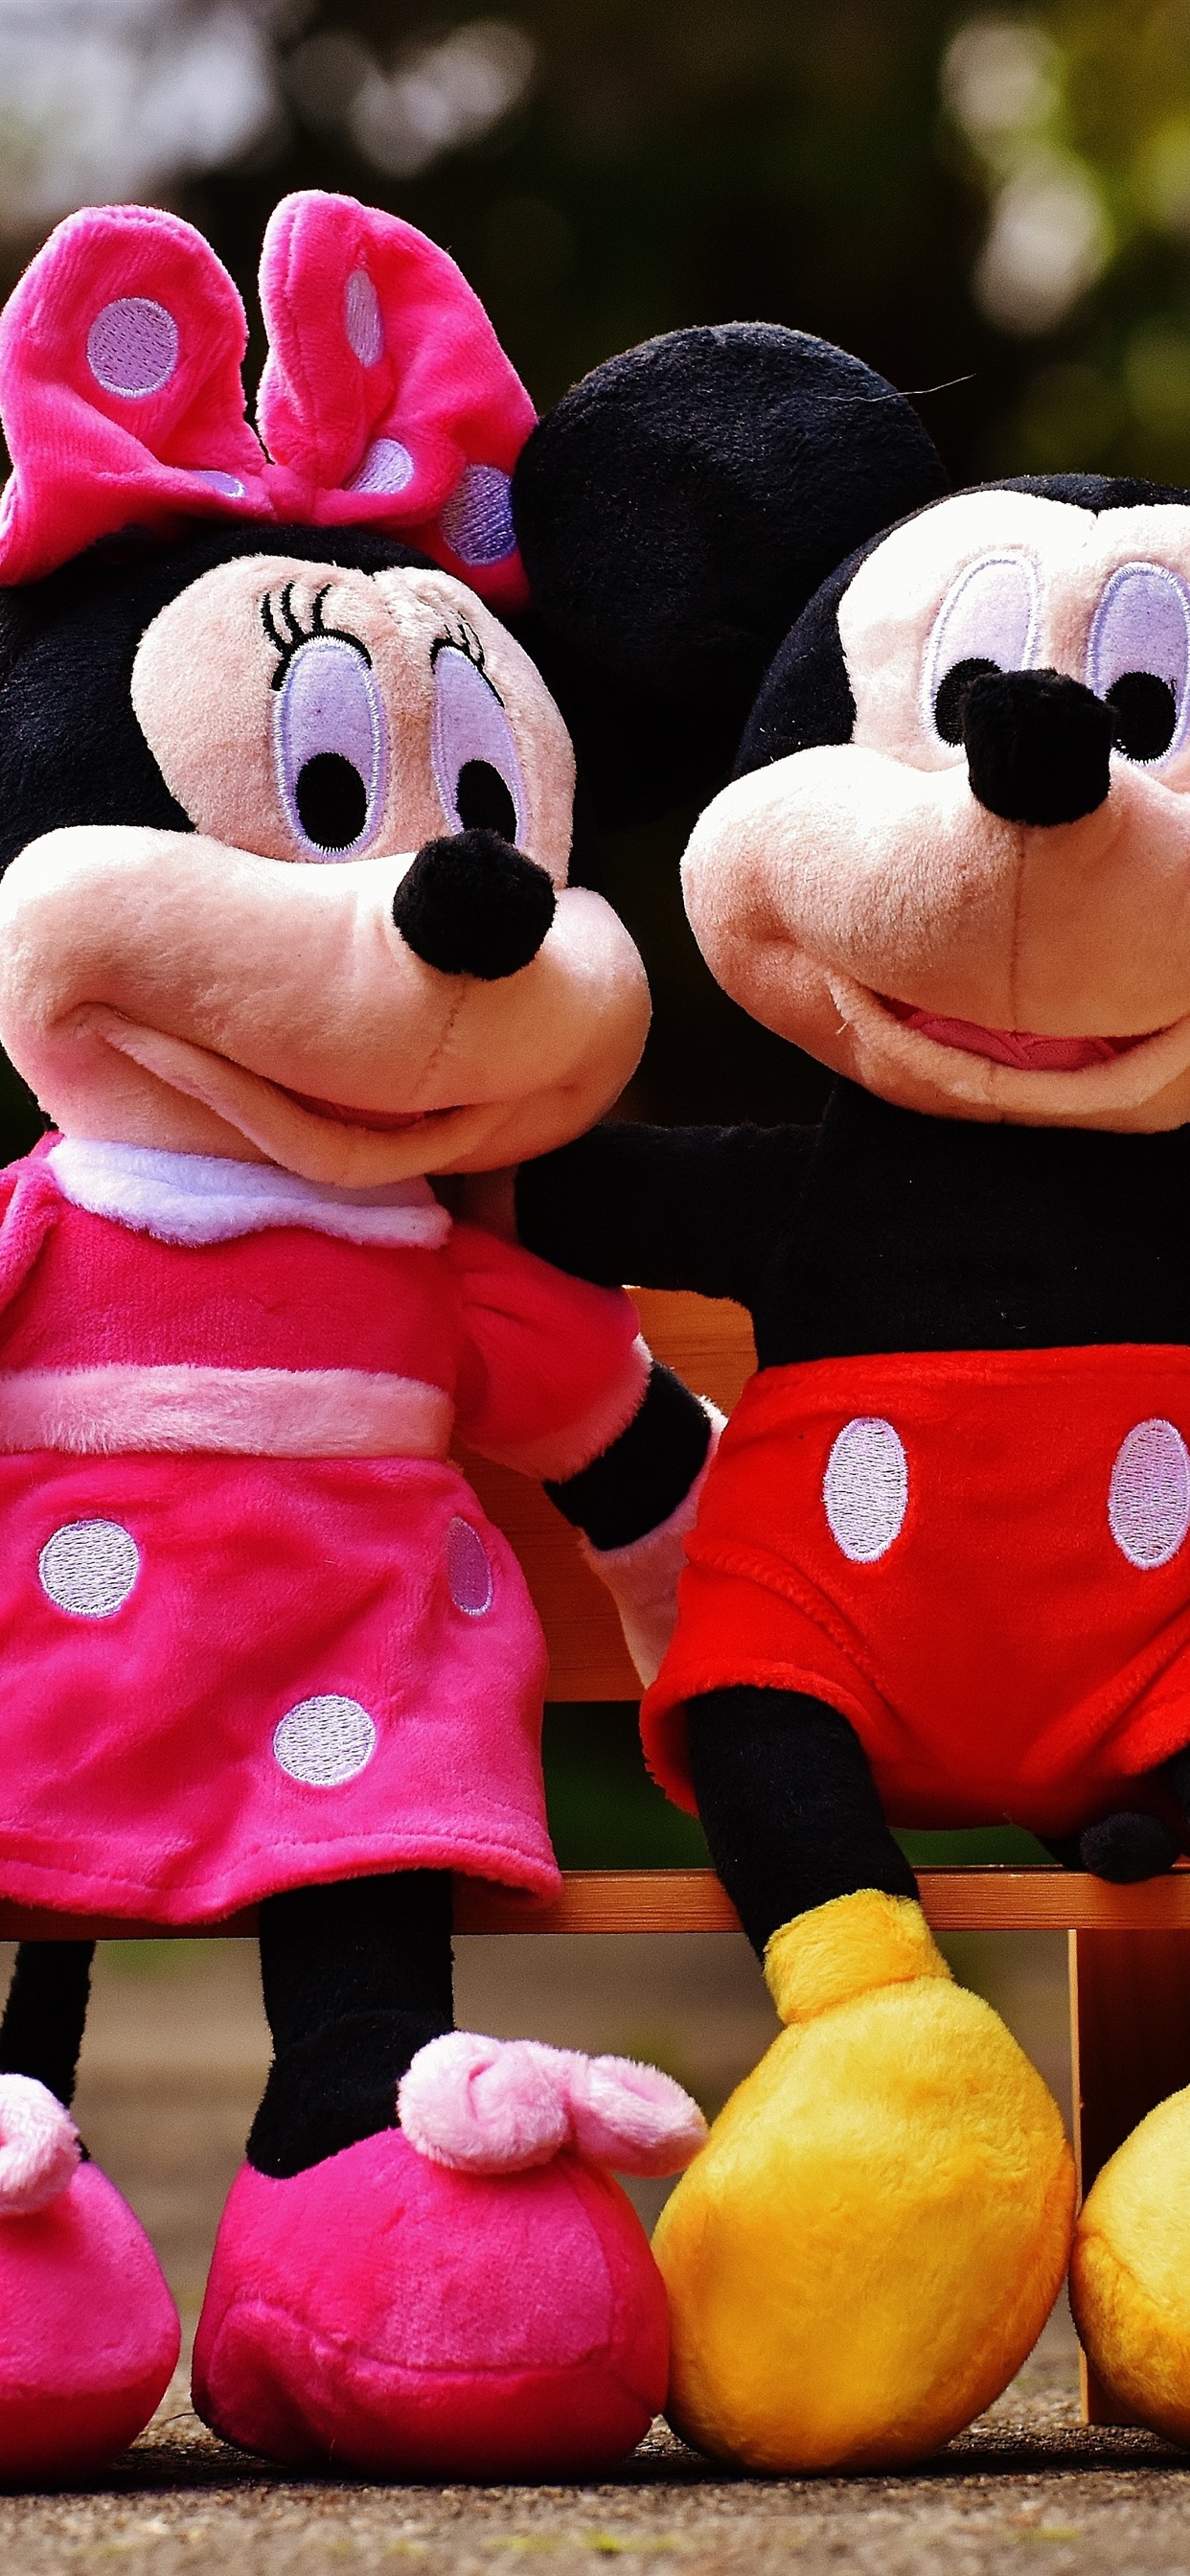 Mickey And Minnie, Mouse 1242x2688 IPhone 11 Pro XS Max Wallpaper, Background, Picture, Image